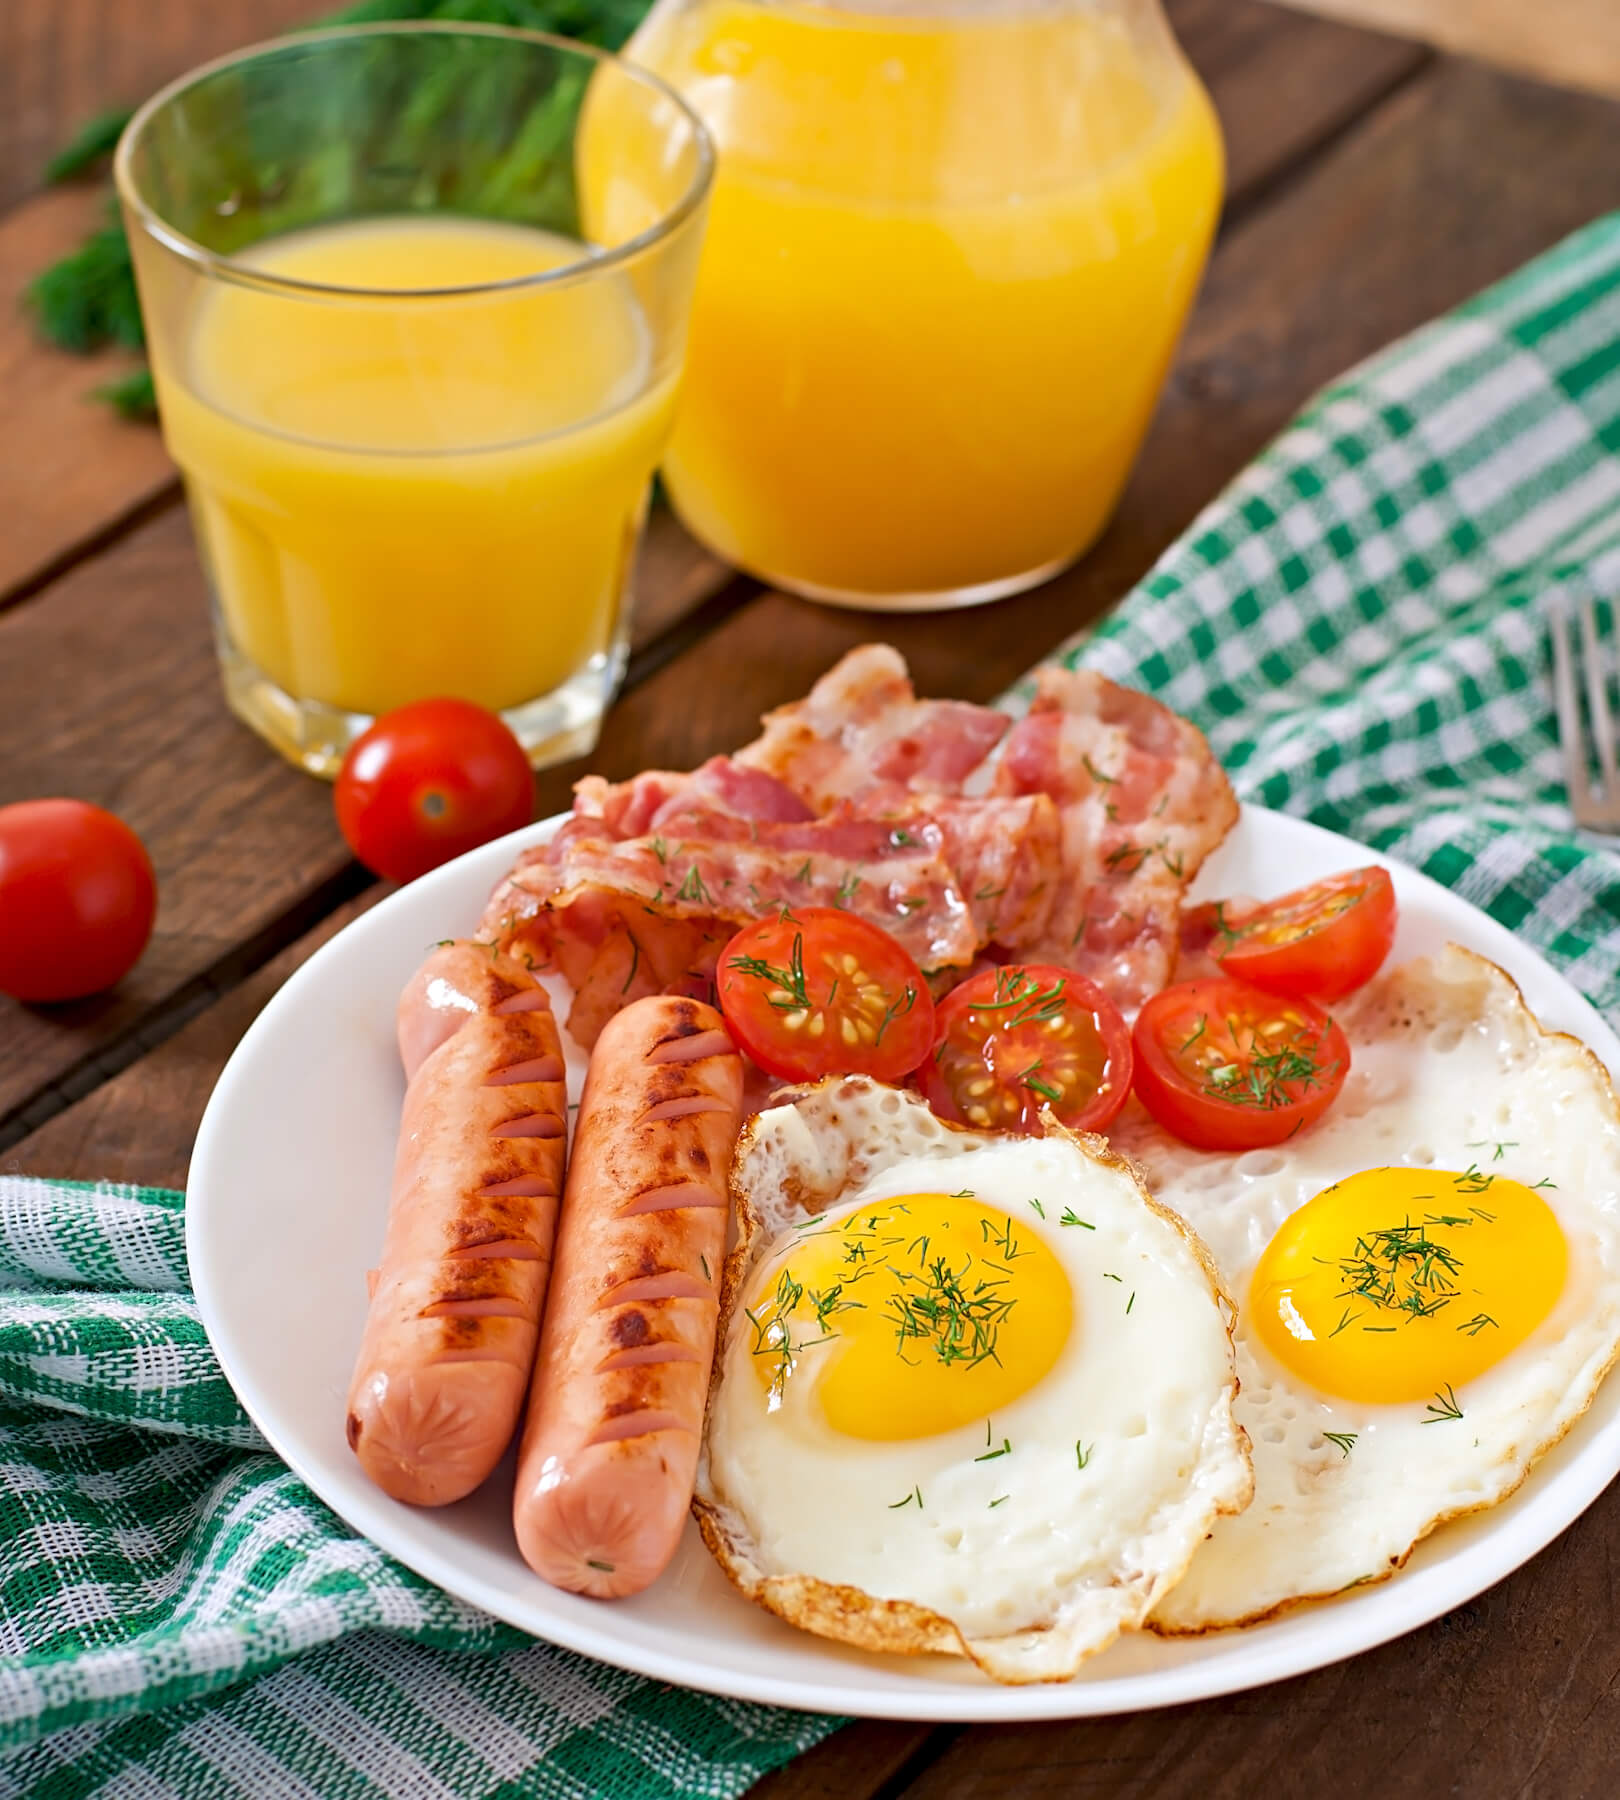 english-breakfast-toast-egg-bacon-vegetables-rustic-style-wooden-table